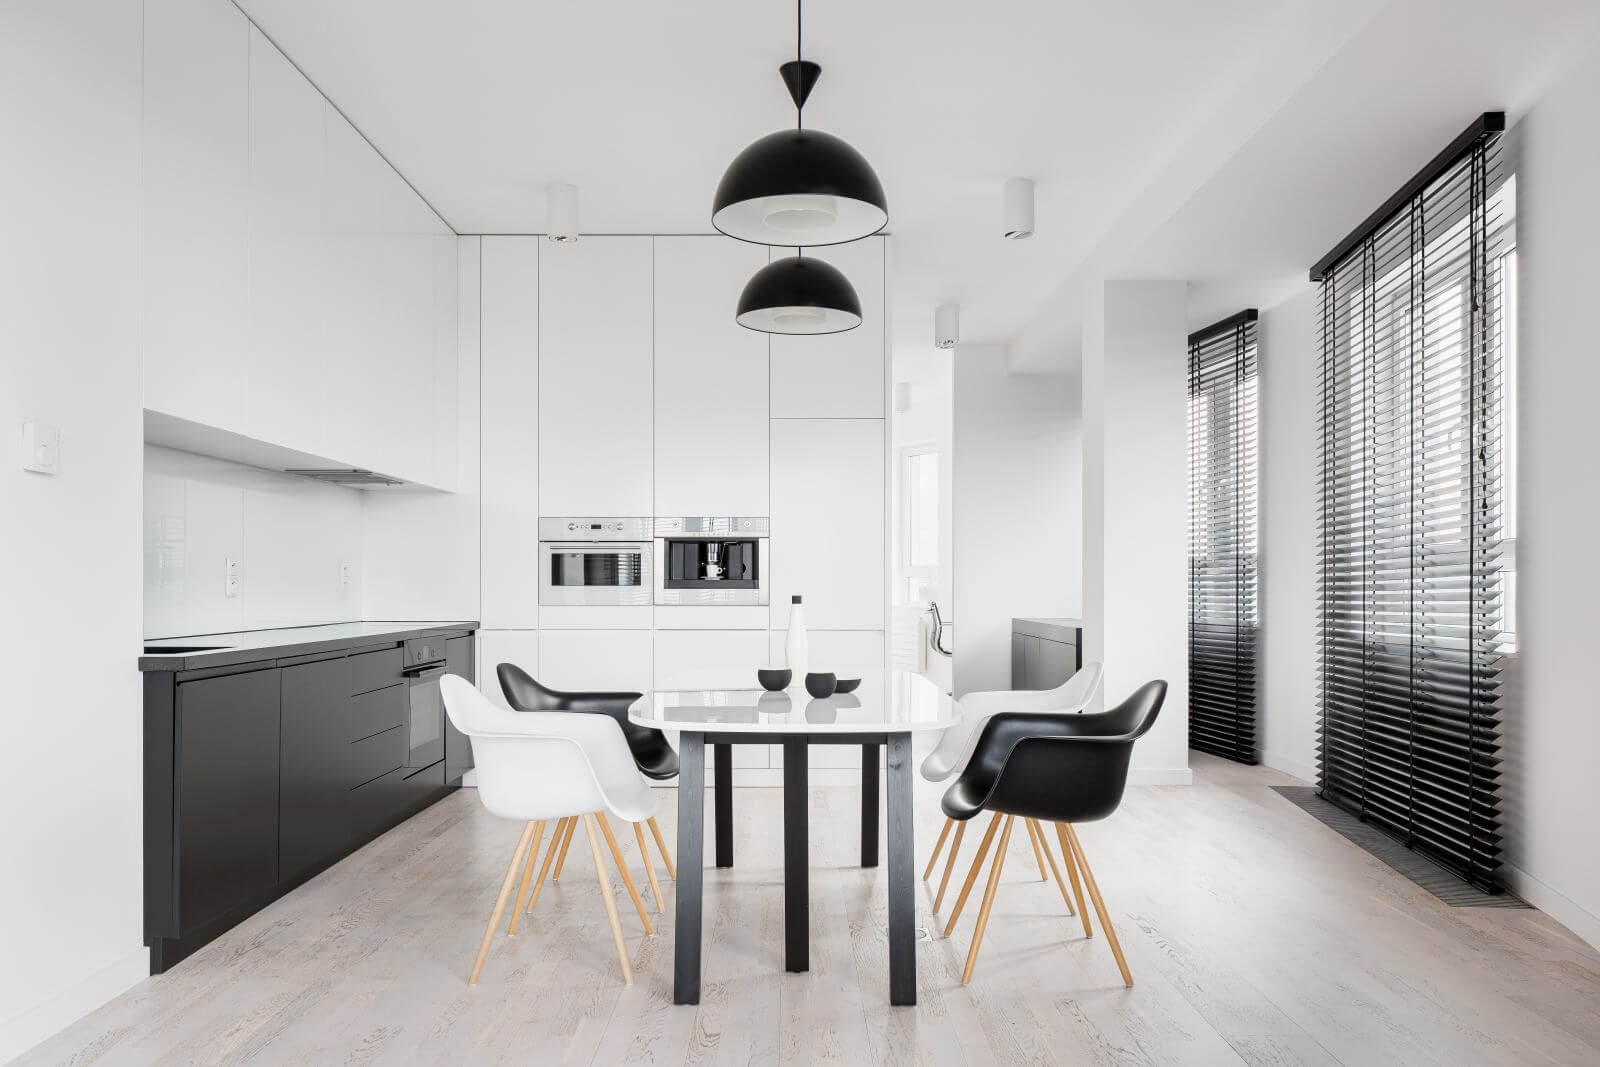 Spacious kitchen interior in black and white with dining area